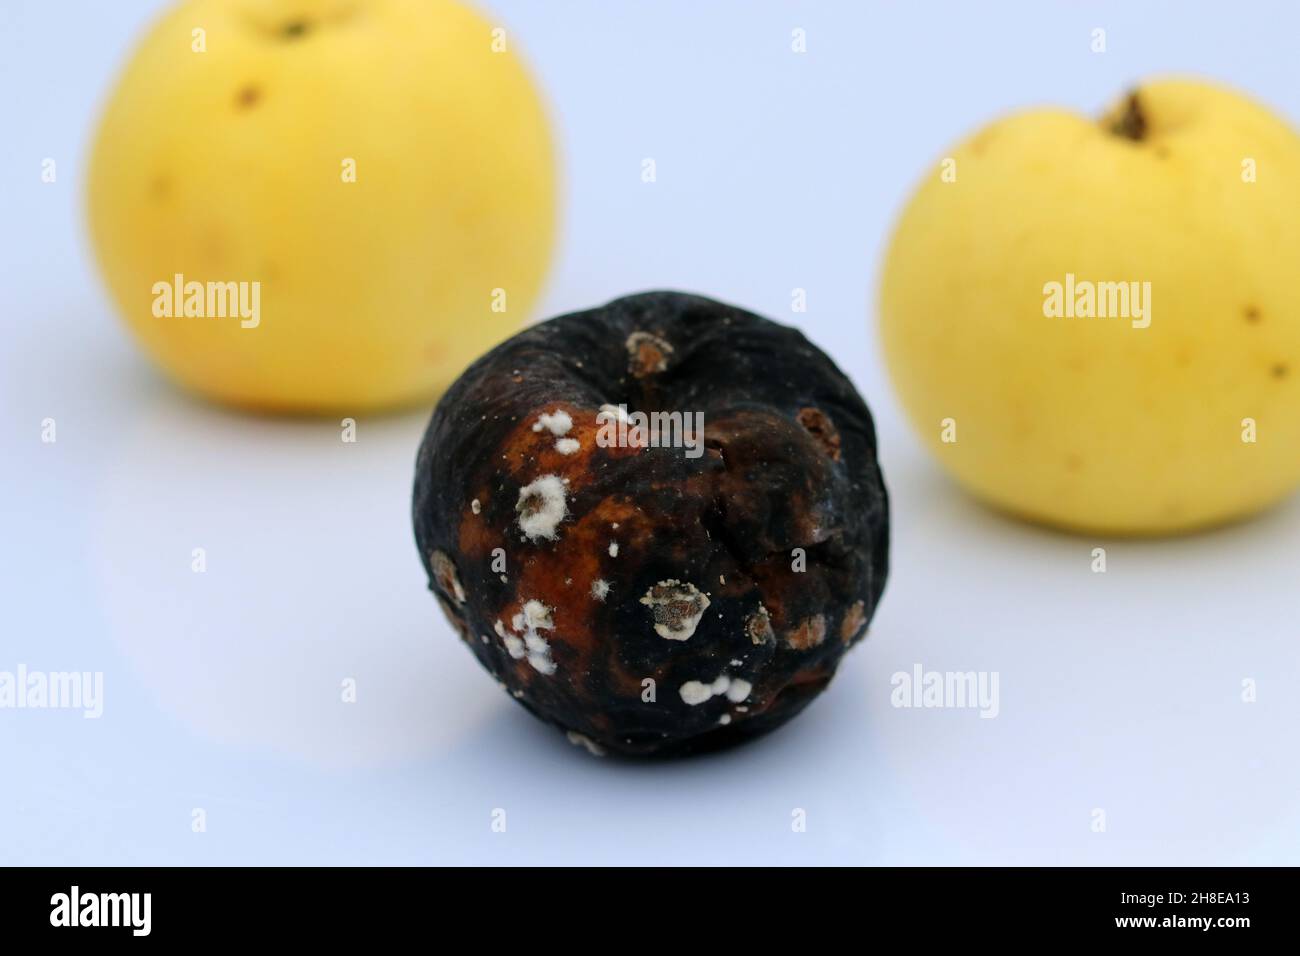 Rotten apple on white background. Rotten apple against blurred yellow apples. Stock Photo